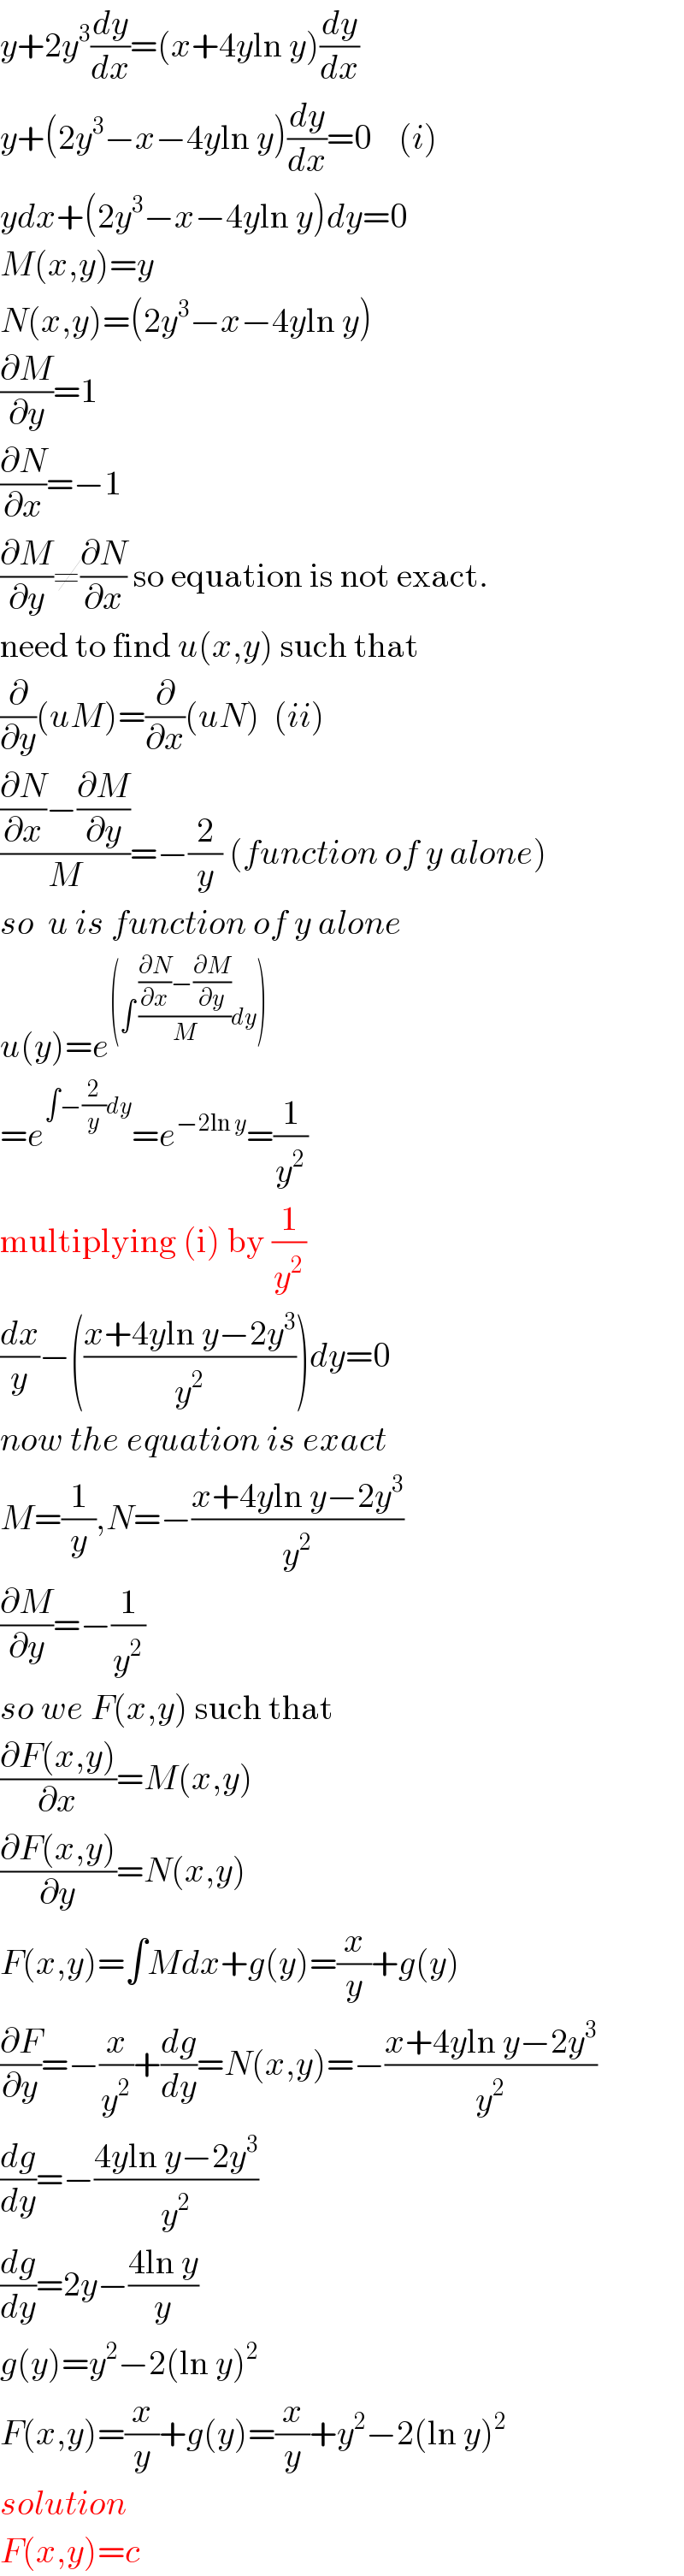 y+2y^3 (dy/dx)=(x+4yln y)(dy/dx)  y+(2y^3 −x−4yln y)(dy/dx)=0    (i)  ydx+(2y^3 −x−4yln y)dy=0  M(x,y)=y  N(x,y)=(2y^3 −x−4yln y)  (∂M/∂y)=1  (∂N/∂x)=−1  (∂M/∂y)≠(∂N/∂x) so equation is not exact.  need to find u(x,y) such that  (∂/∂y)(uM)=(∂/∂x)(uN)  (ii)  (((∂N/∂x)−(∂M/∂y))/M)=−(2/y) (function of y alone)  so  u is function of y alone  u(y)=e^((∫ (((∂N/∂x)−(∂M/∂y))/M)dy))   =e^(∫−(2/y)dy) =e^(−2ln y) =(1/y^2 )  multiplying (i) by (1/y^2 )  (dx/y)−(((x+4yln y−2y^3 )/y^2 ))dy=0  now the equation is exact  M=(1/y),N=−((x+4yln y−2y^3 )/y^2 )  (∂M/∂y)=−(1/y^2 )  so we F(x,y) such that  ((∂F(x,y))/∂x)=M(x,y)  ((∂F(x,y))/∂y)=N(x,y)  F(x,y)=∫Mdx+g(y)=(x/y)+g(y)  (∂F/∂y)=−(x/y^2 )+(dg/dy)=N(x,y)=−((x+4yln y−2y^3 )/y^2 )  (dg/dy)=−((4yln y−2y^3 )/y^2 )  (dg/dy)=2y−((4ln y)/y)  g(y)=y^2 −2(ln y)^2   F(x,y)=(x/y)+g(y)=(x/y)+y^2 −2(ln y)^2   solution  F(x,y)=c  